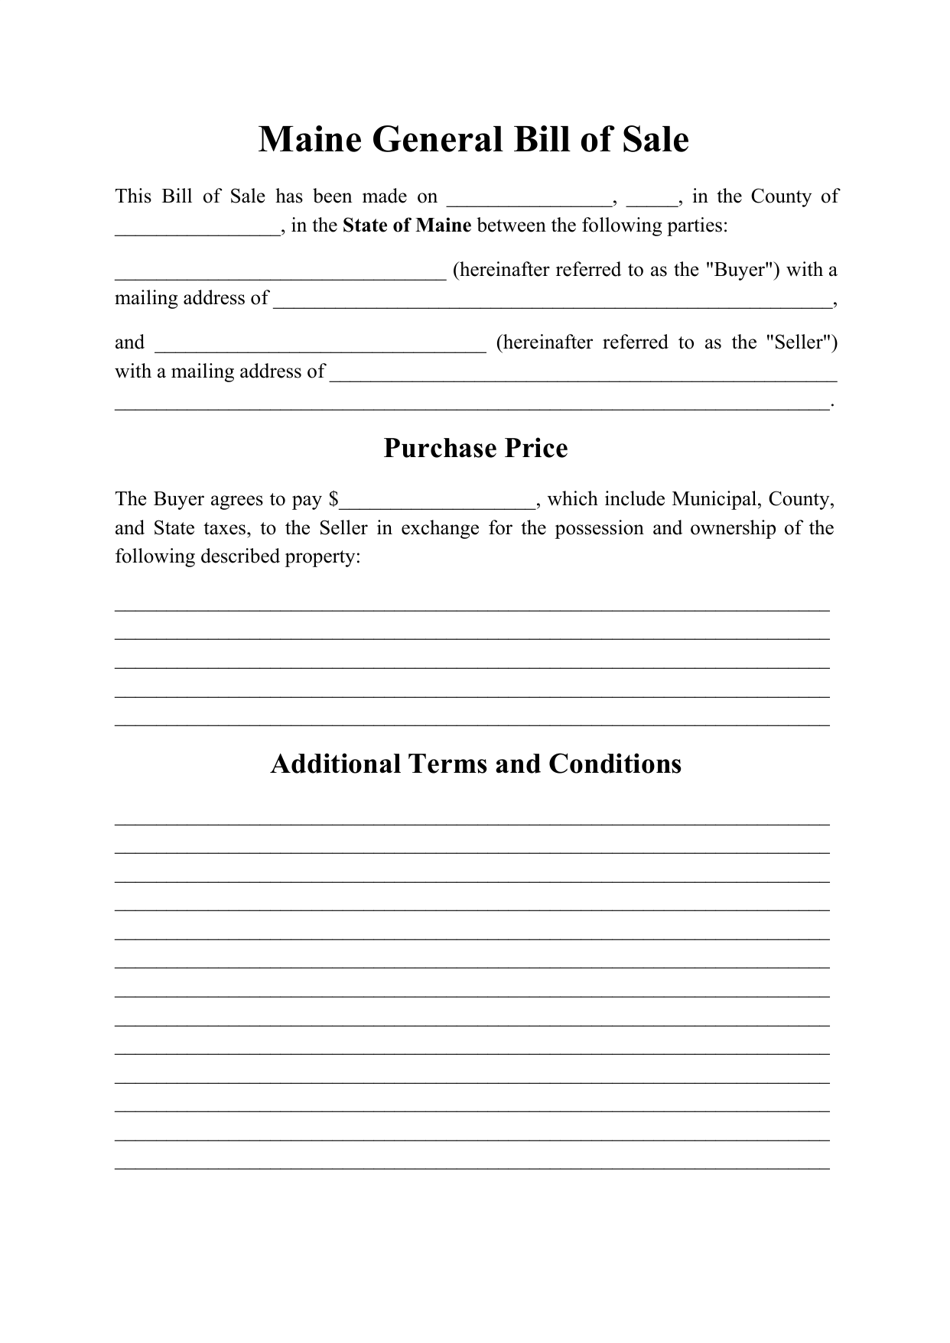 maine-generic-bill-of-sale-form-download-printable-pdf-templateroller